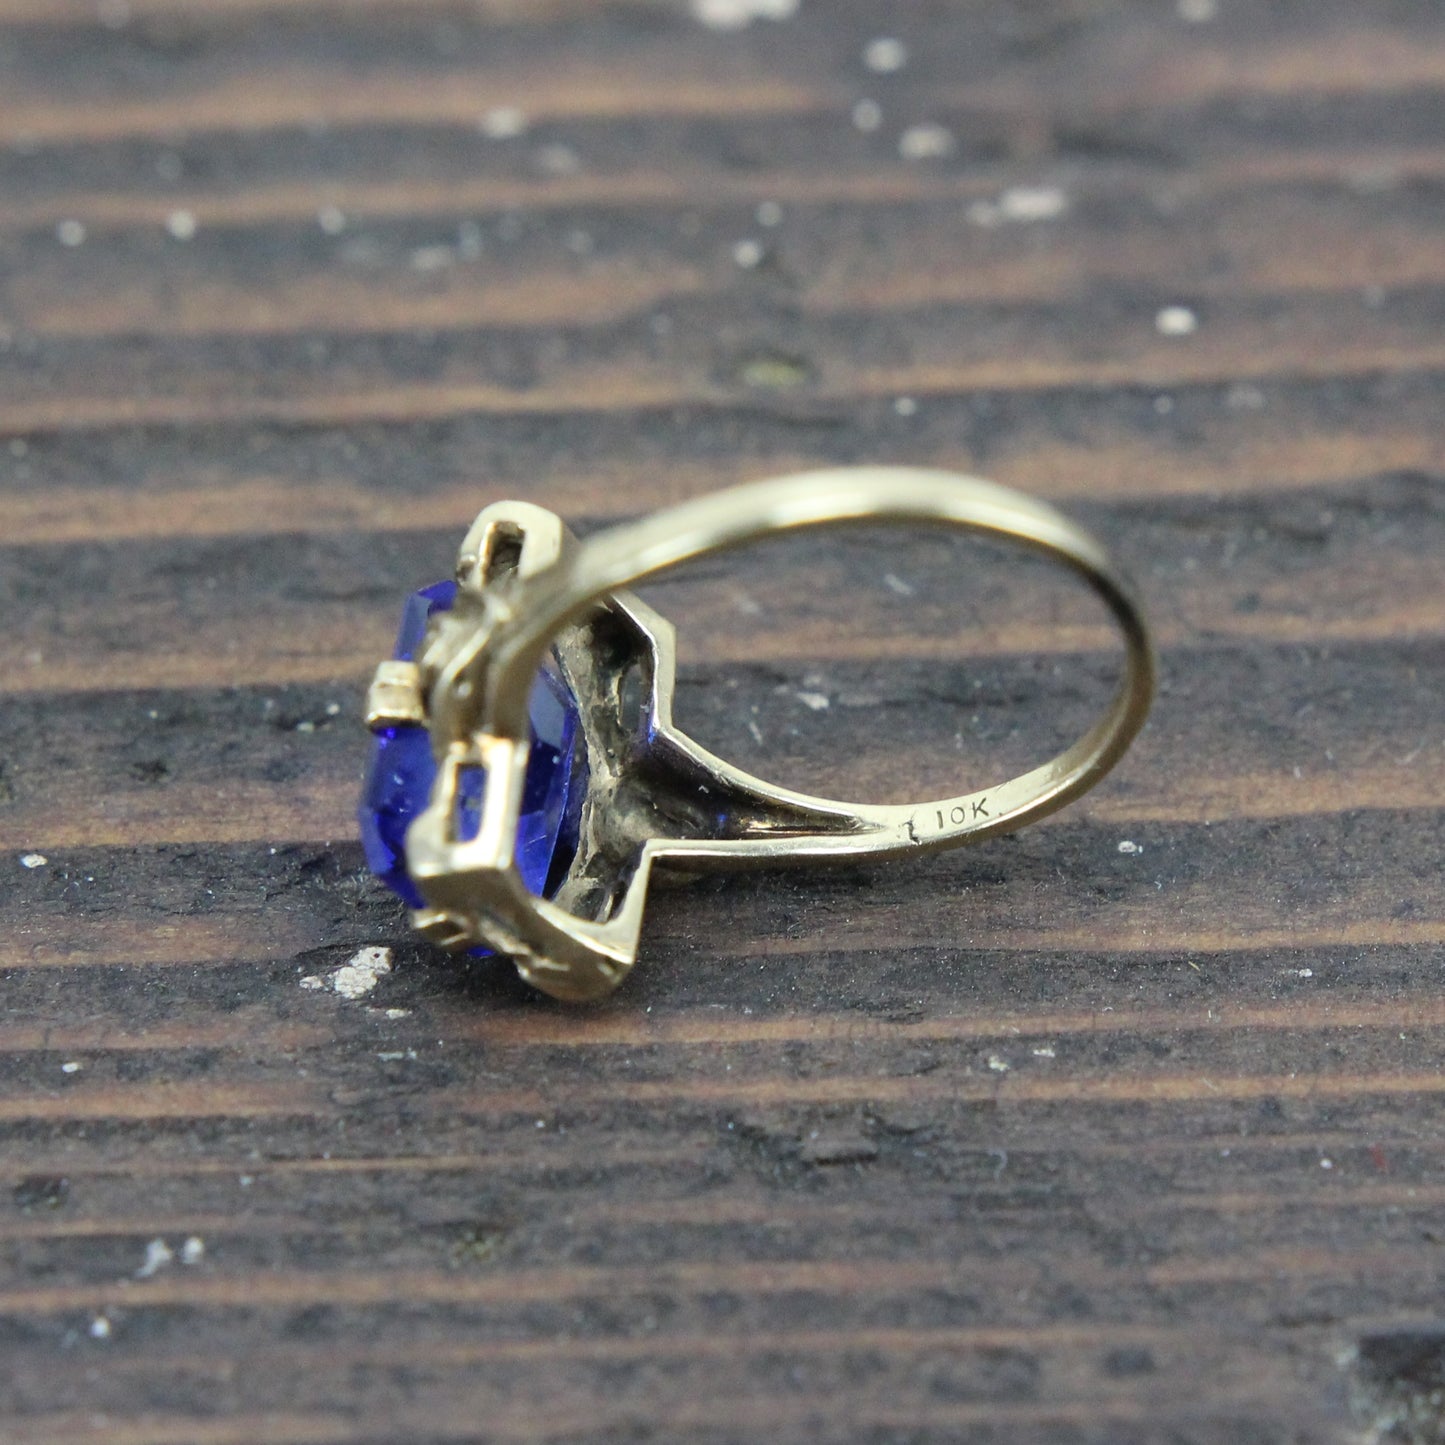 10k Gold Ring with Blue Stone - Size 5.5